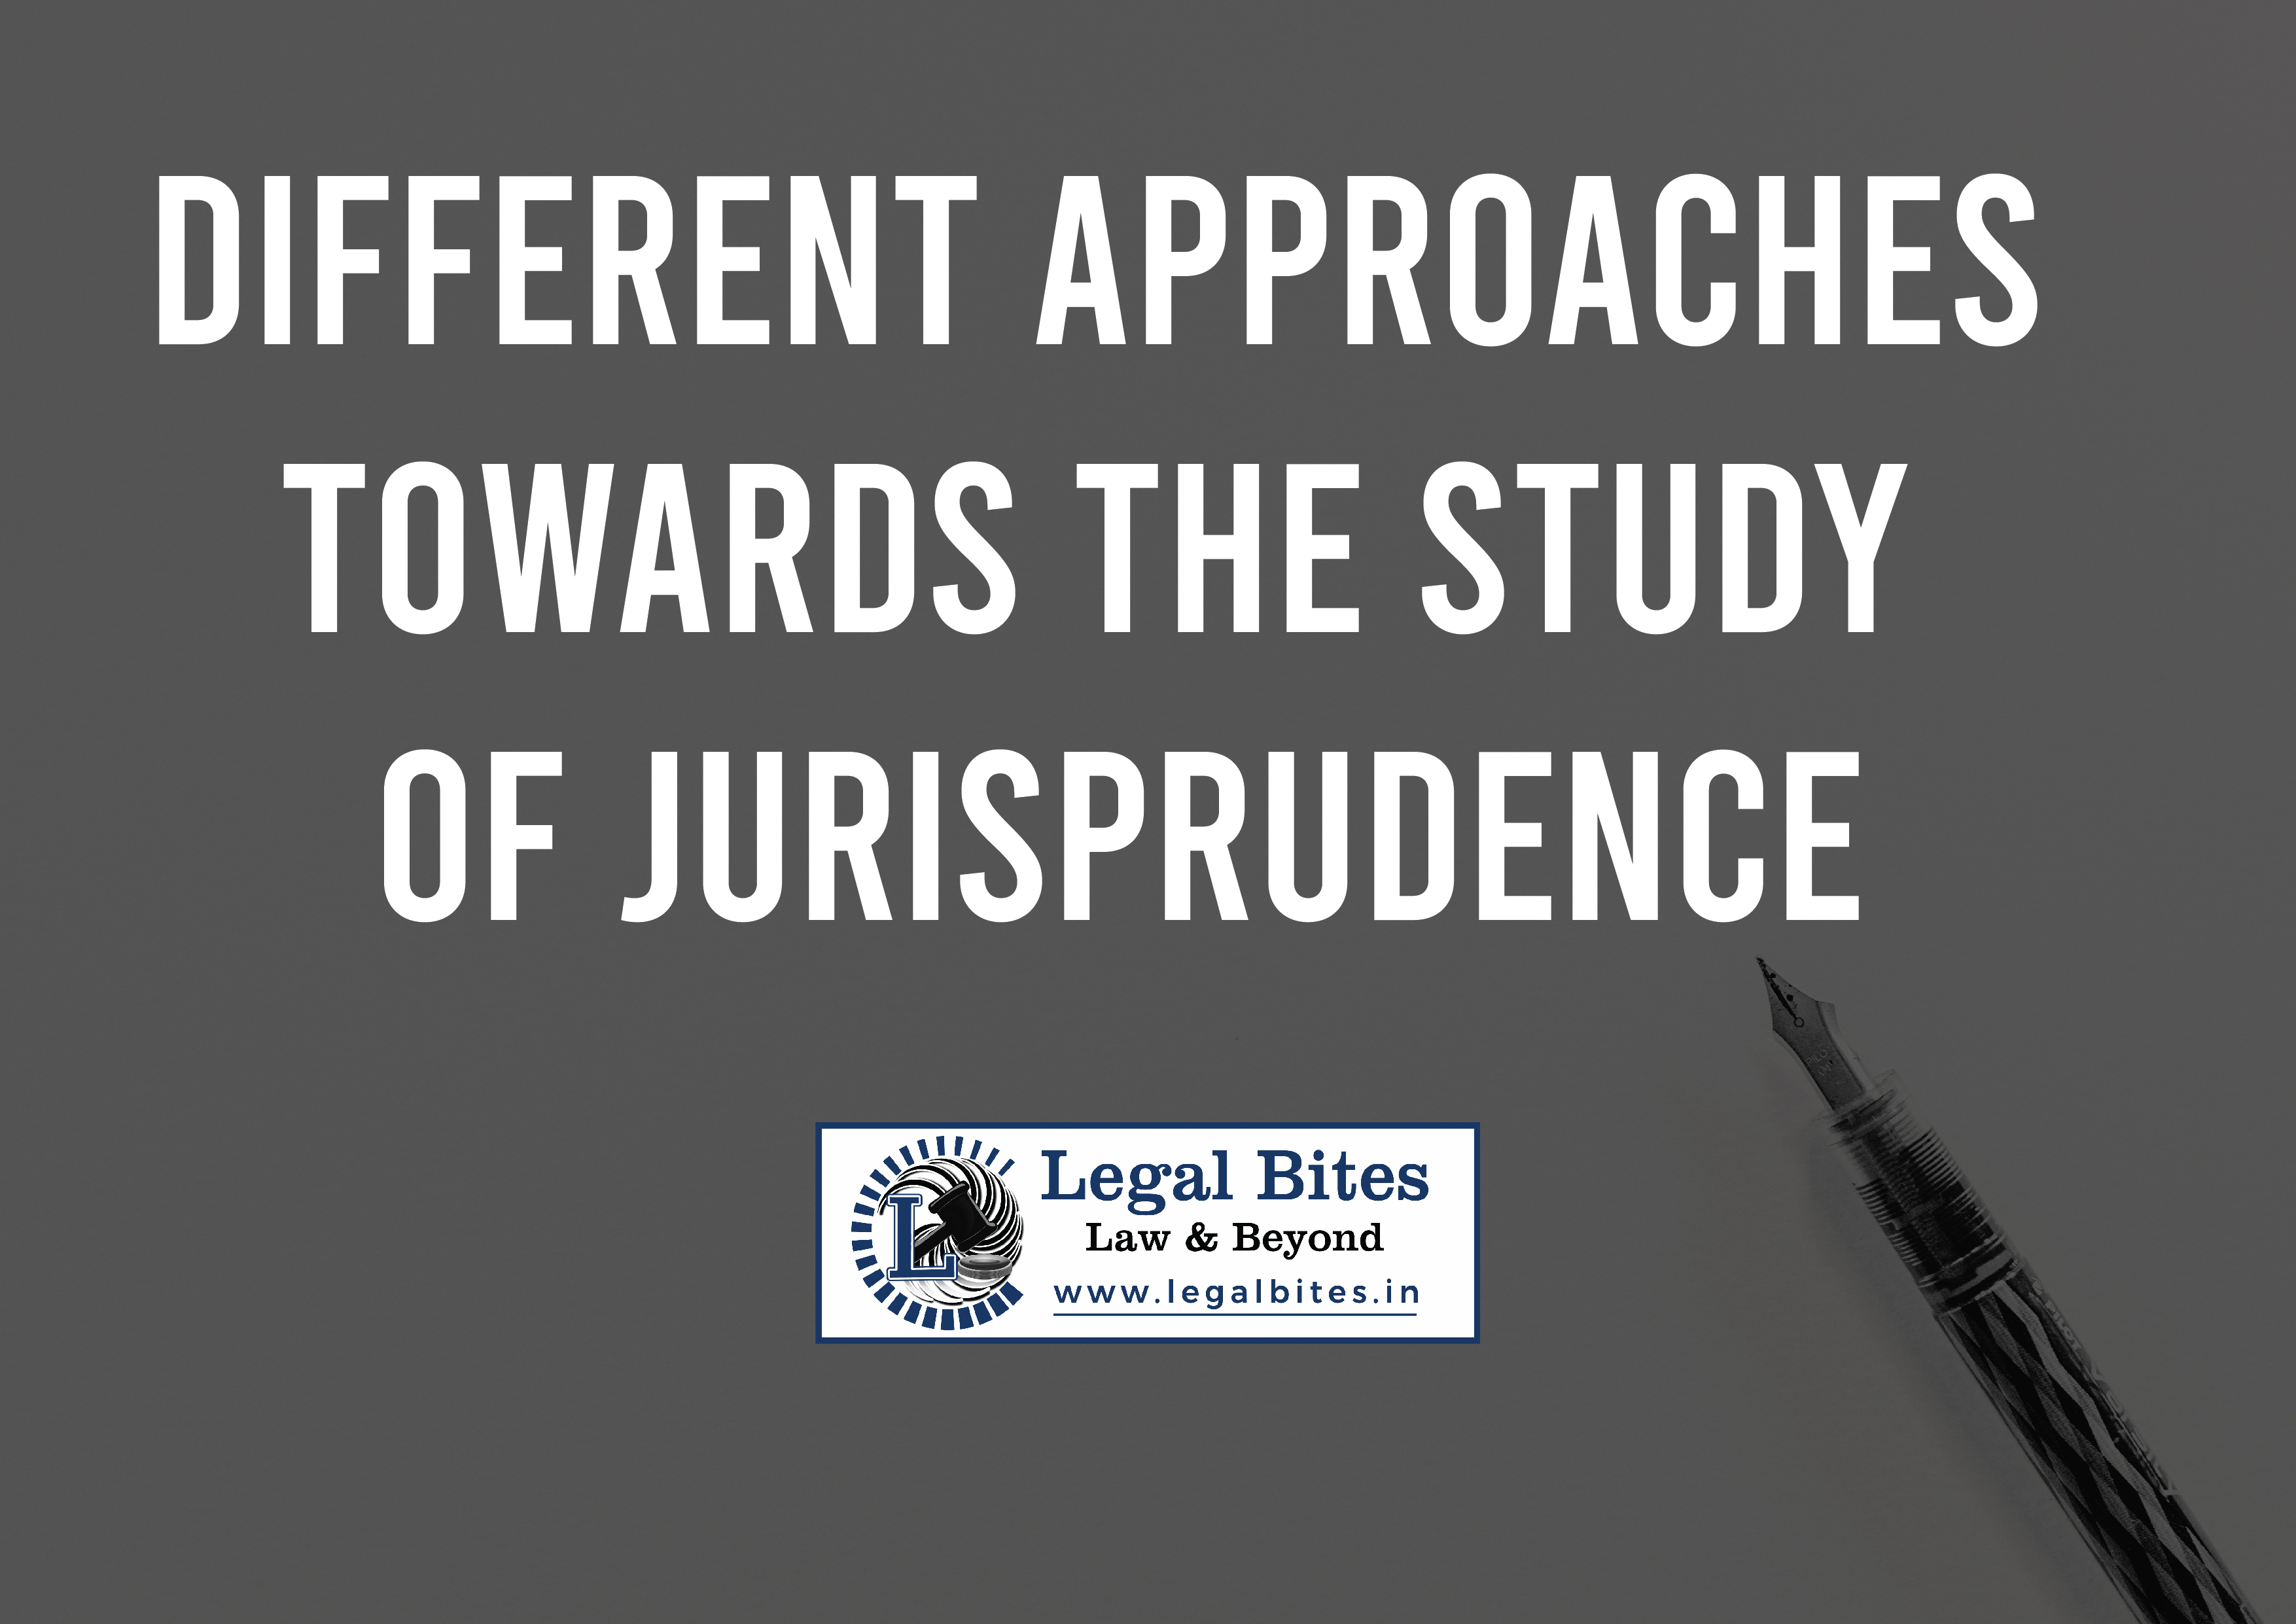 Different Approaches towards the Study of Jurisprudence